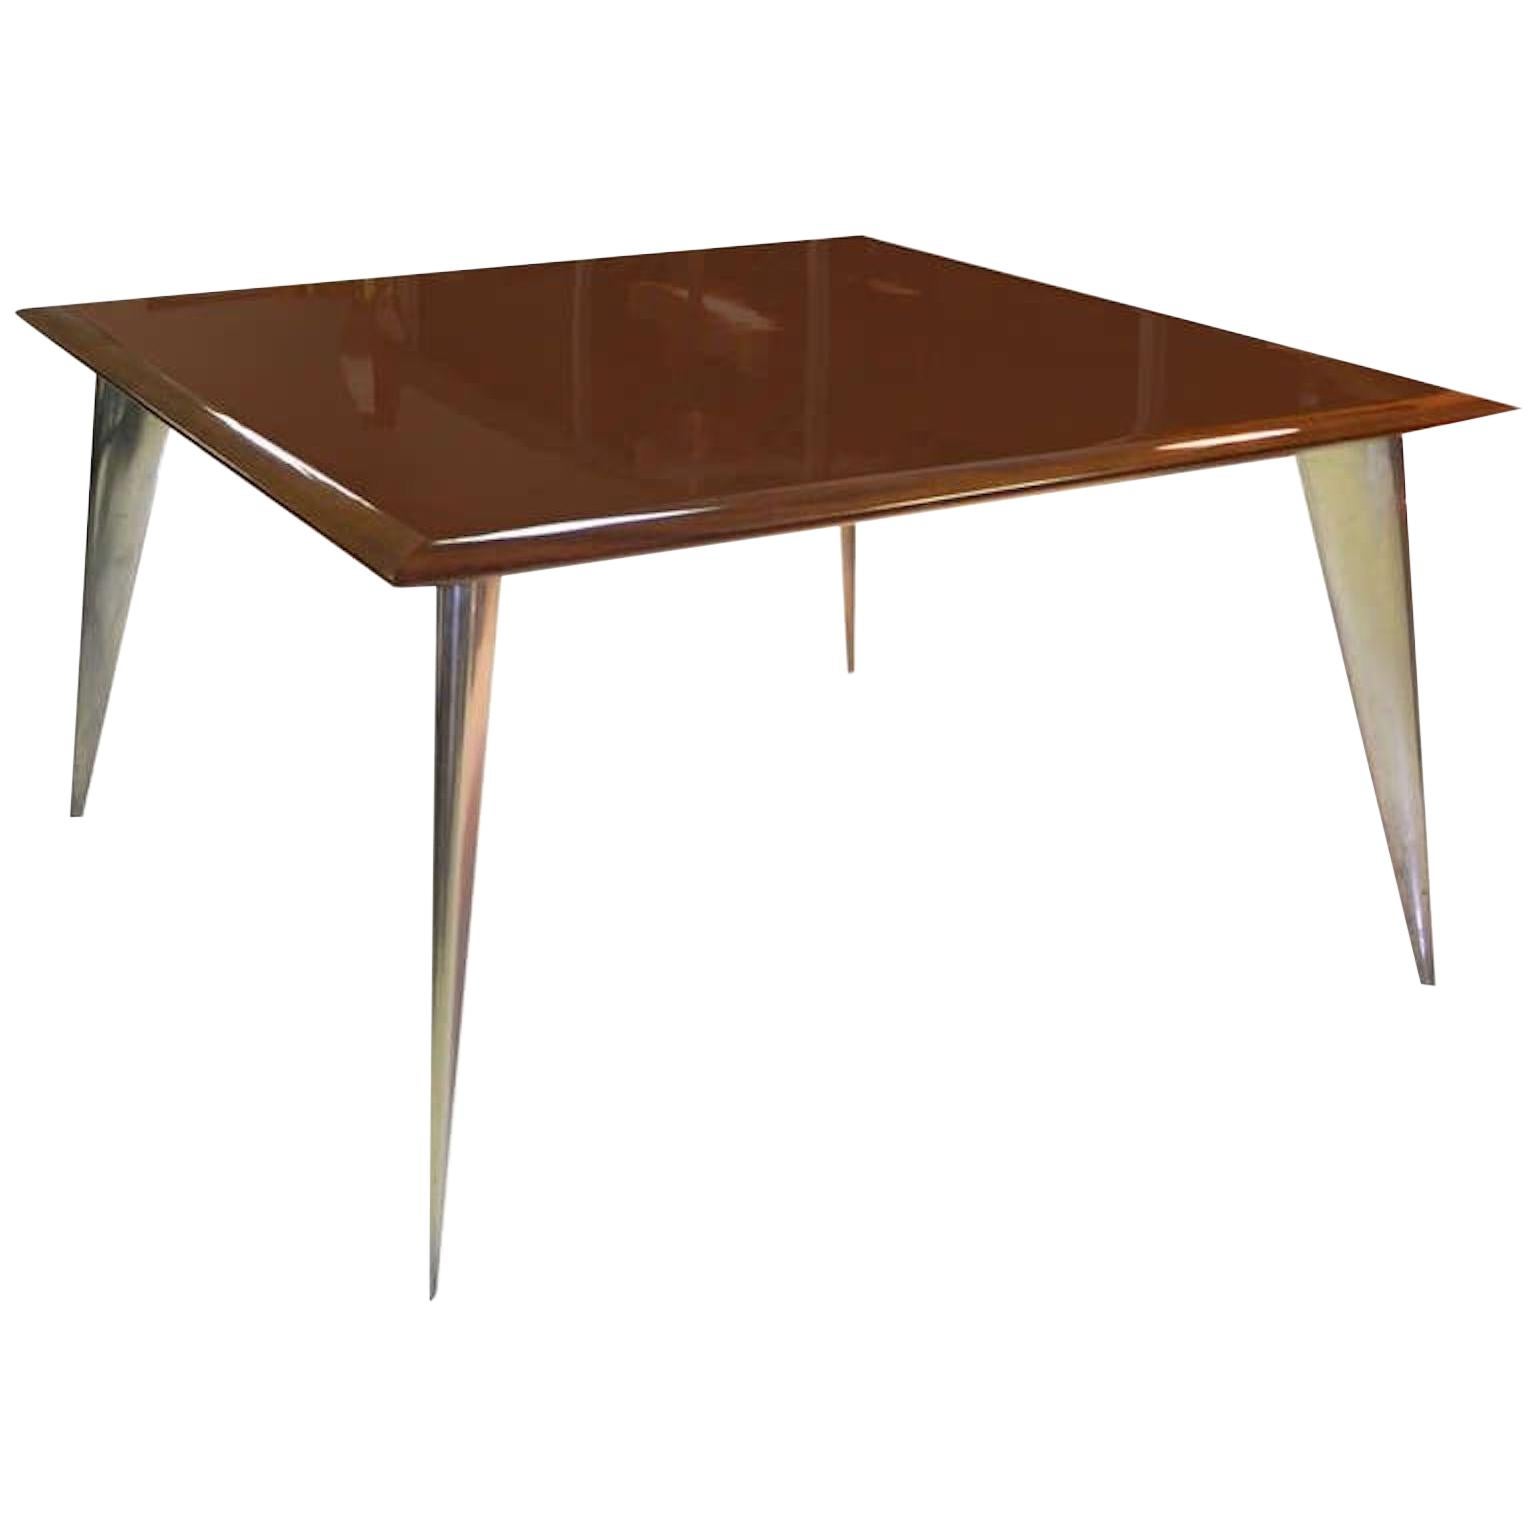 Philippe Starck Square Mahogany Dining Table M 'Serie Lang' for Driade Aleph